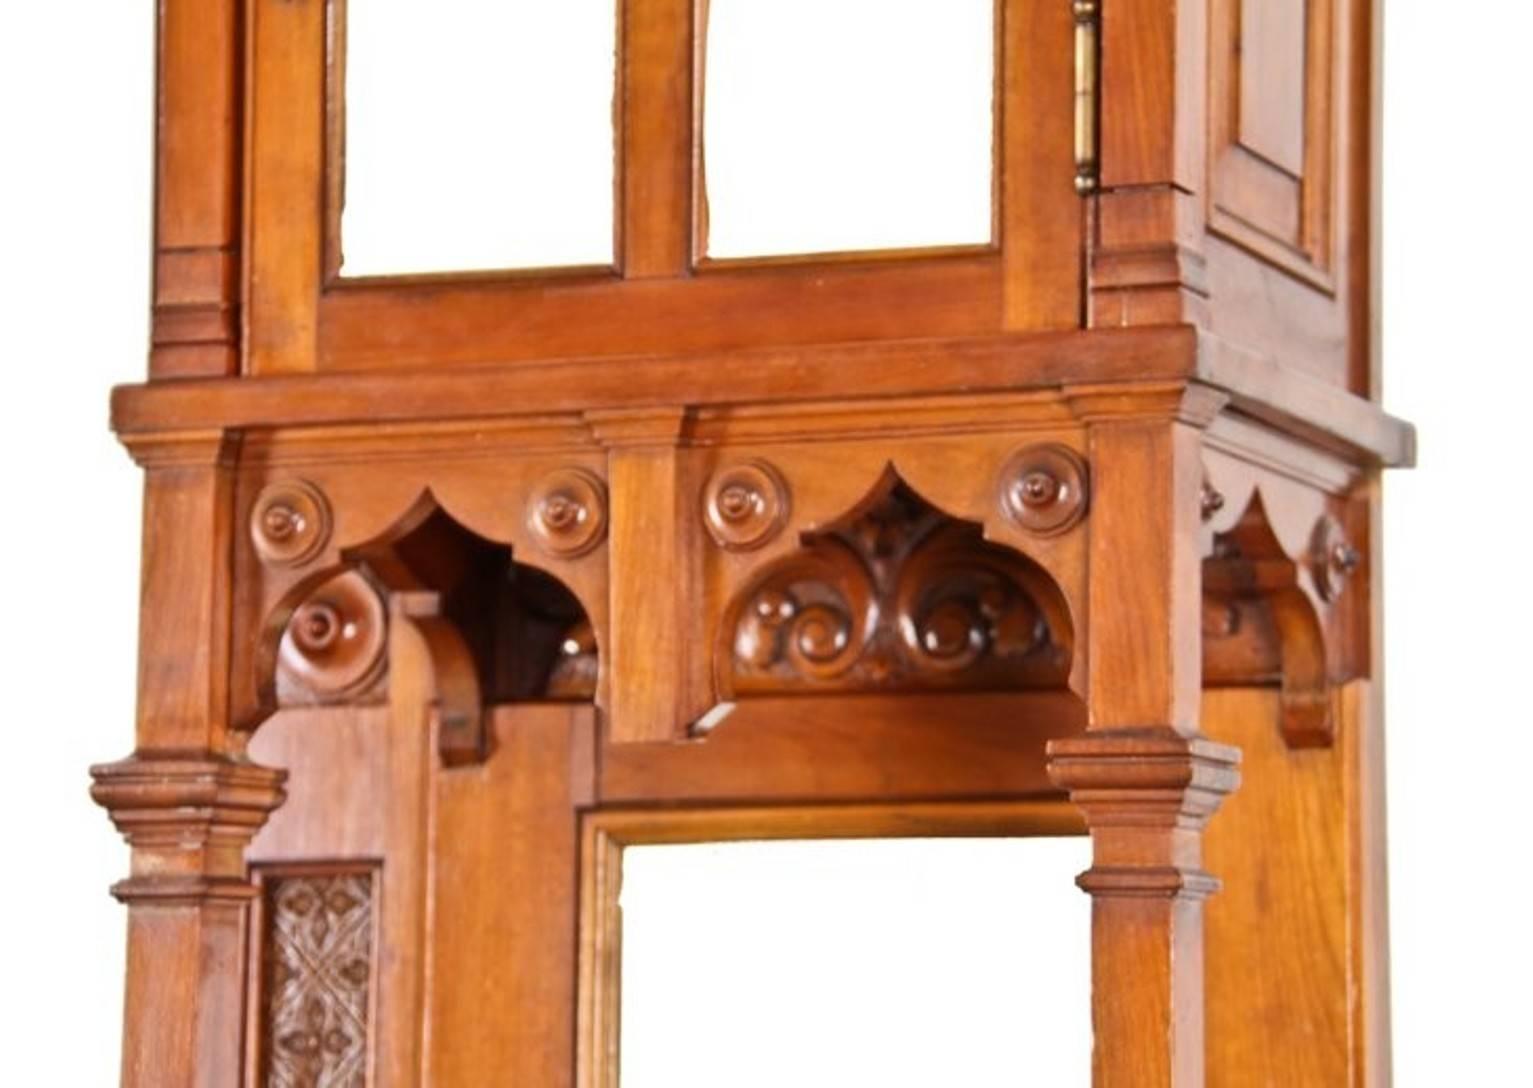 Aesthetic Movement 19th Century Cherry Wood Interior Mantel from the Cook Mansion